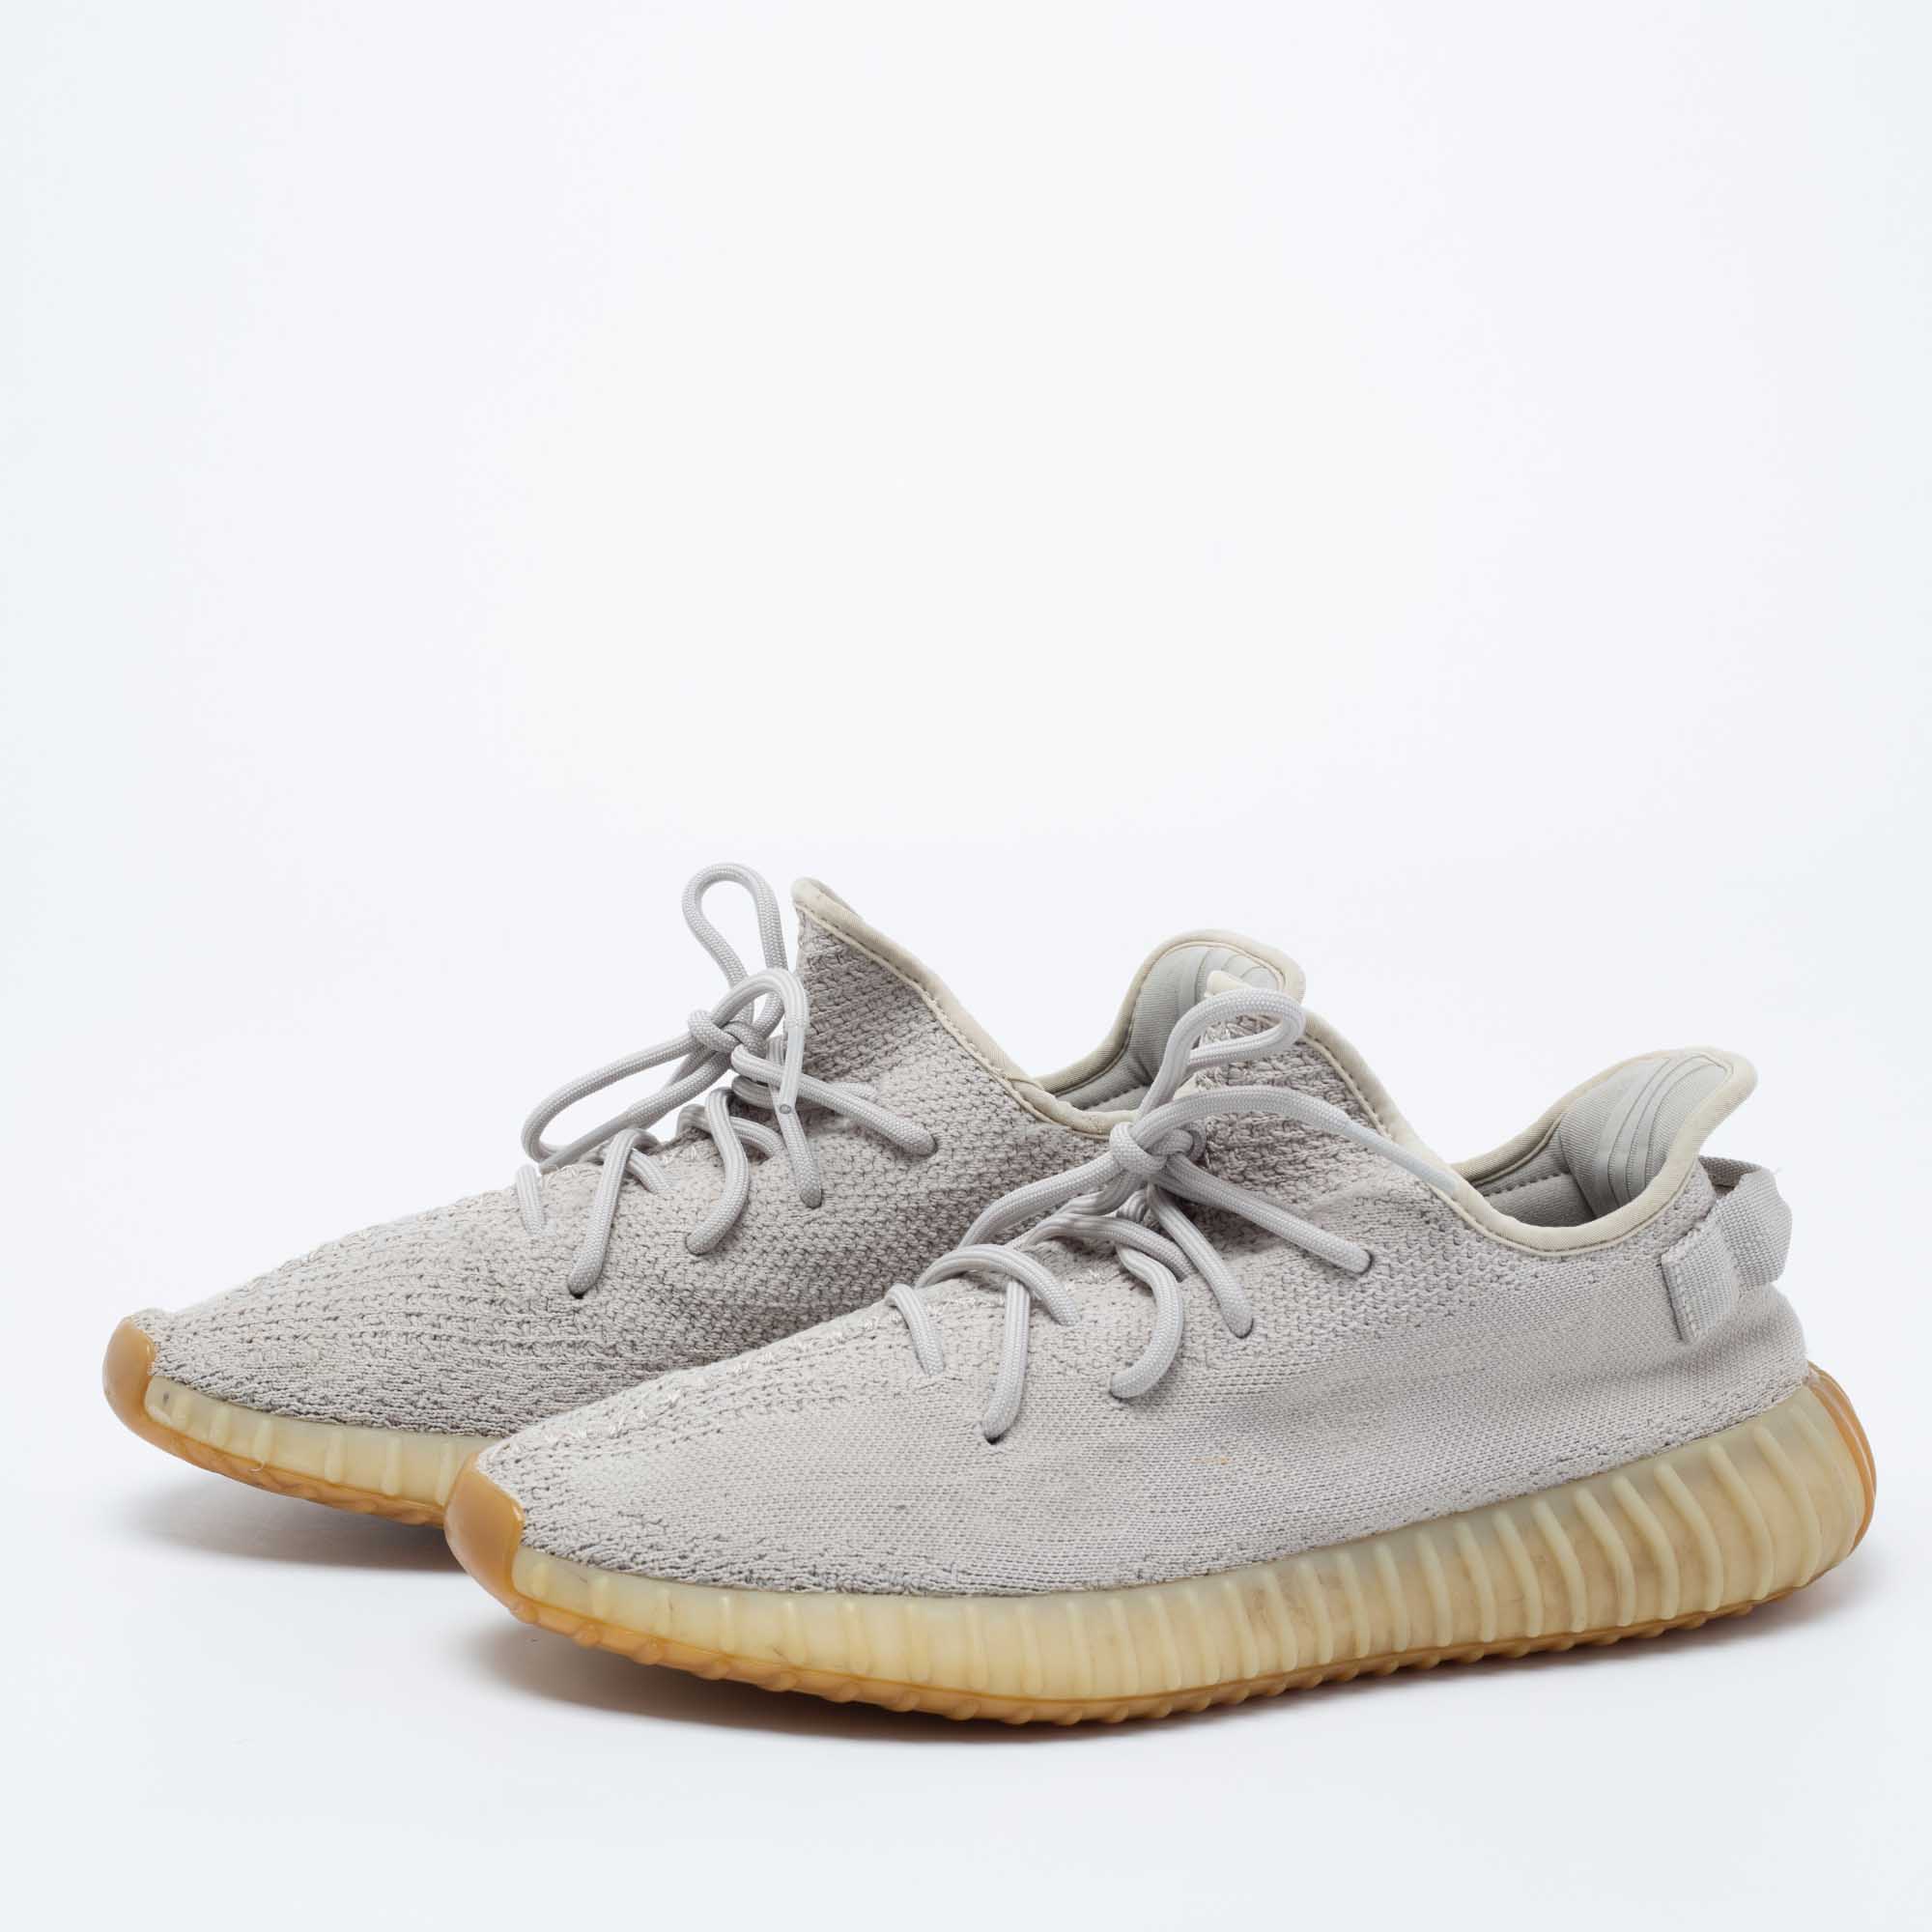 

Yeezy x Adidas Grey Knit Fabric Boost 350 V2 Sesame Sneakers Size 44 2/3